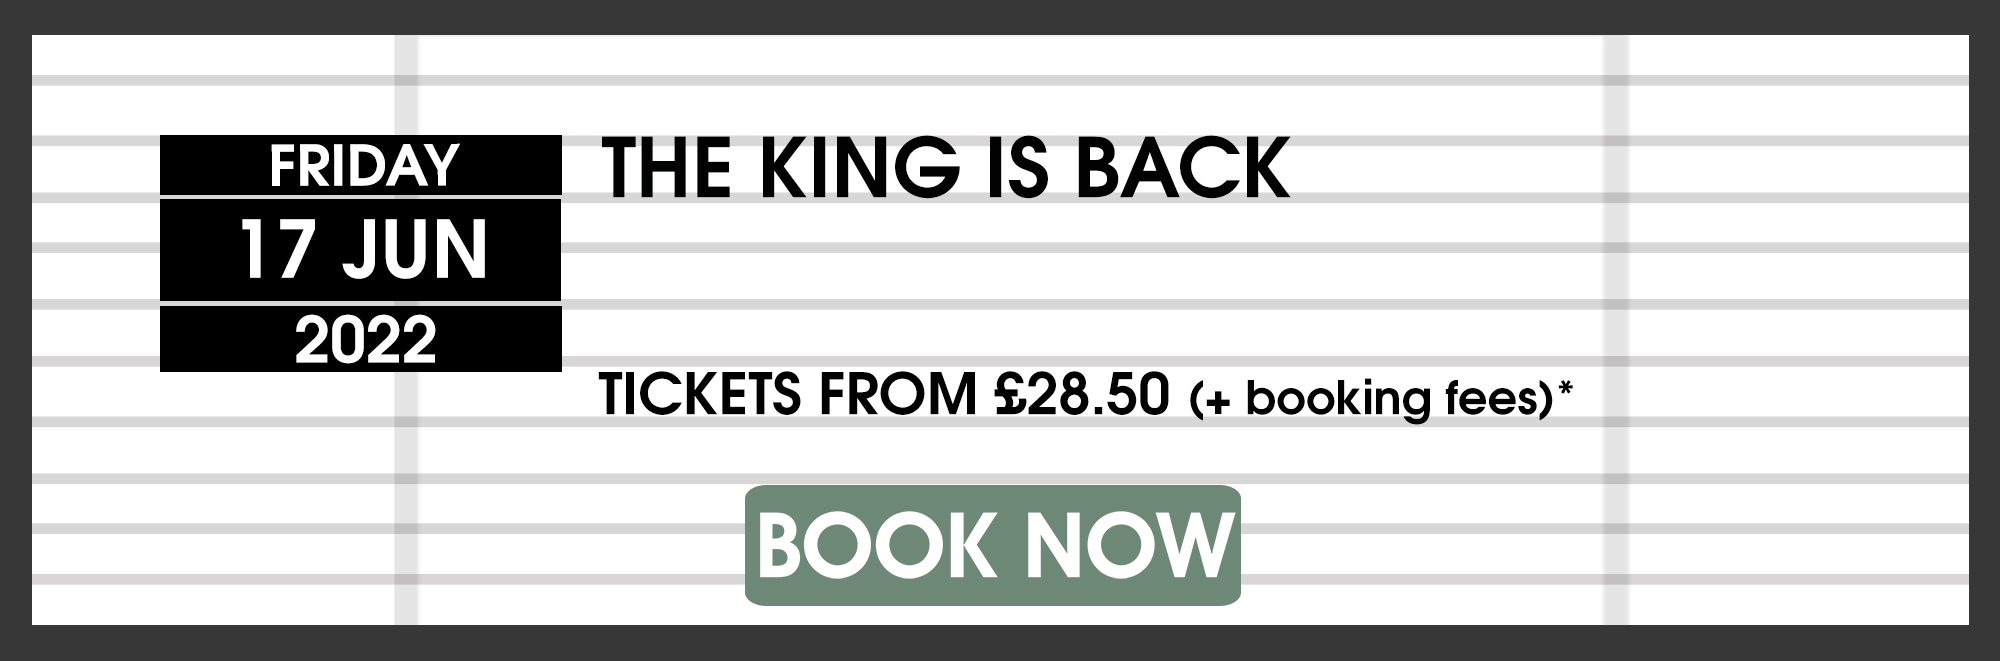 17.06.22 KING IS BACK BOOK NOW